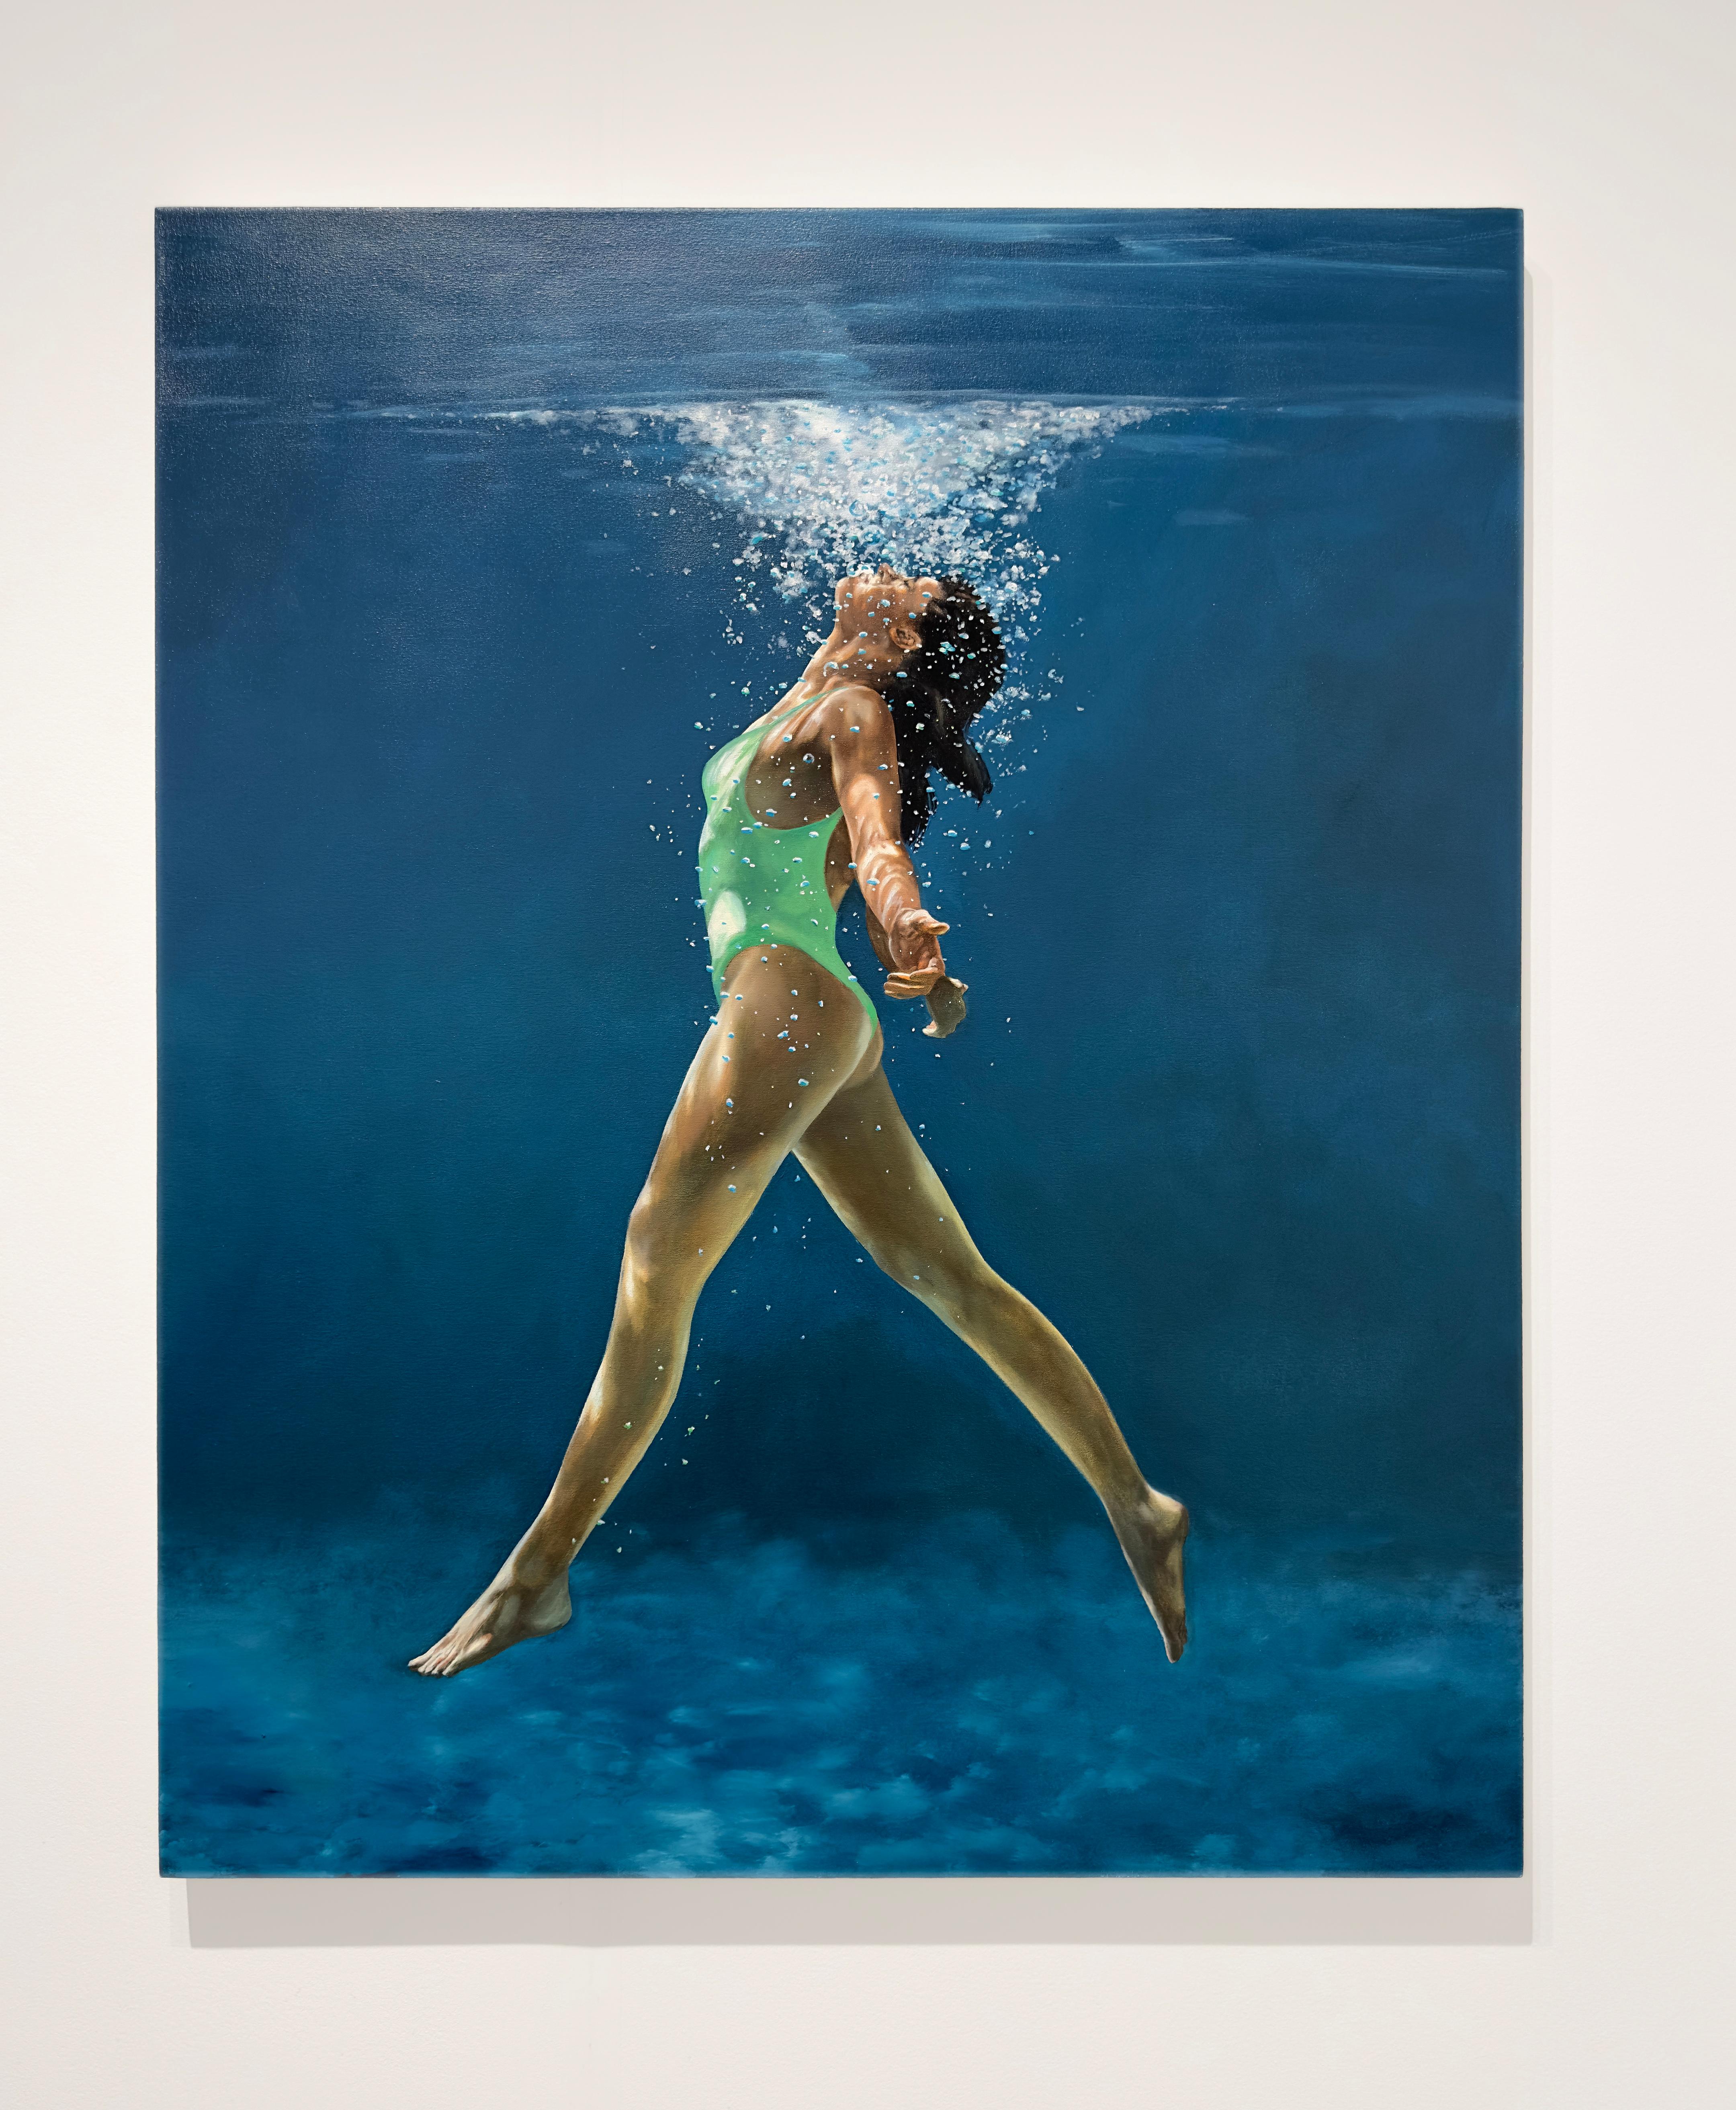 WATER DANCE - Contemporary Realism / Figurative / Swimmer / Blue - Painting by Eric Zener